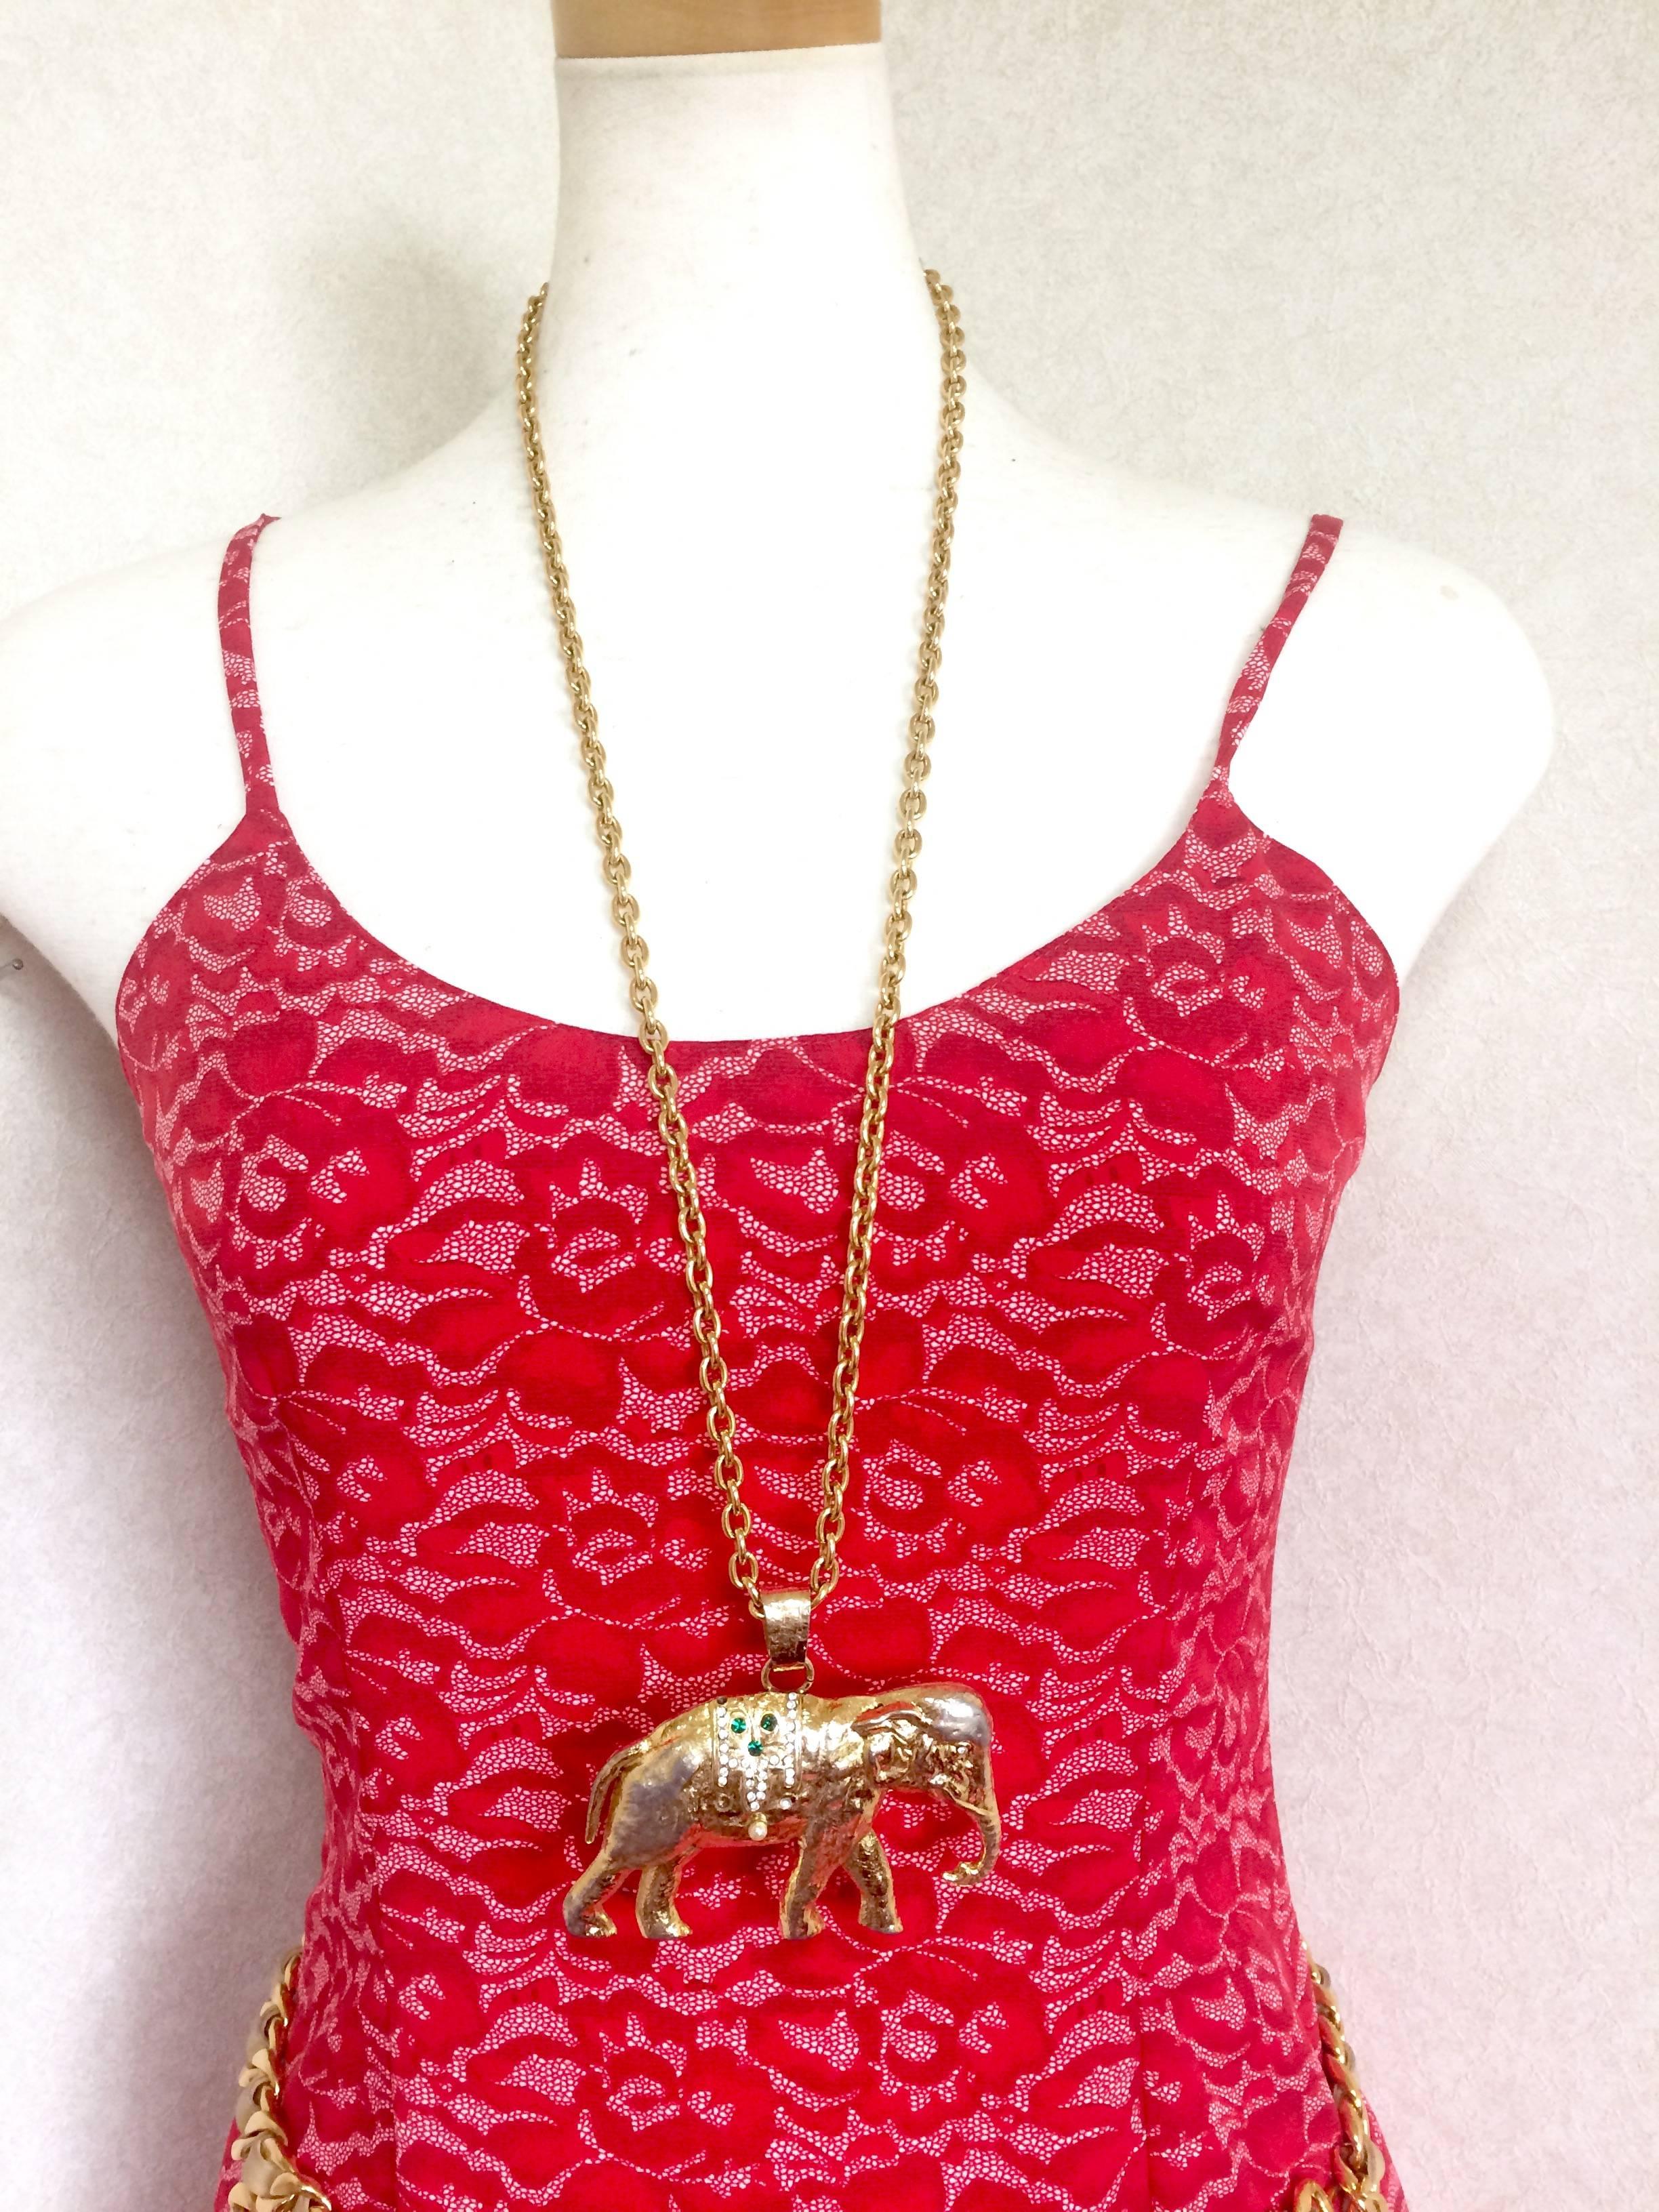 1990s. Vintage Sonia Rykiel gold tone large elephant pendant top long chain necklace. Perfect vintage jewelry from SR.

Here is another rare vintage statement necklace from Sonia Rykiel back in the 80's through early 90's.

Featuring an extra large